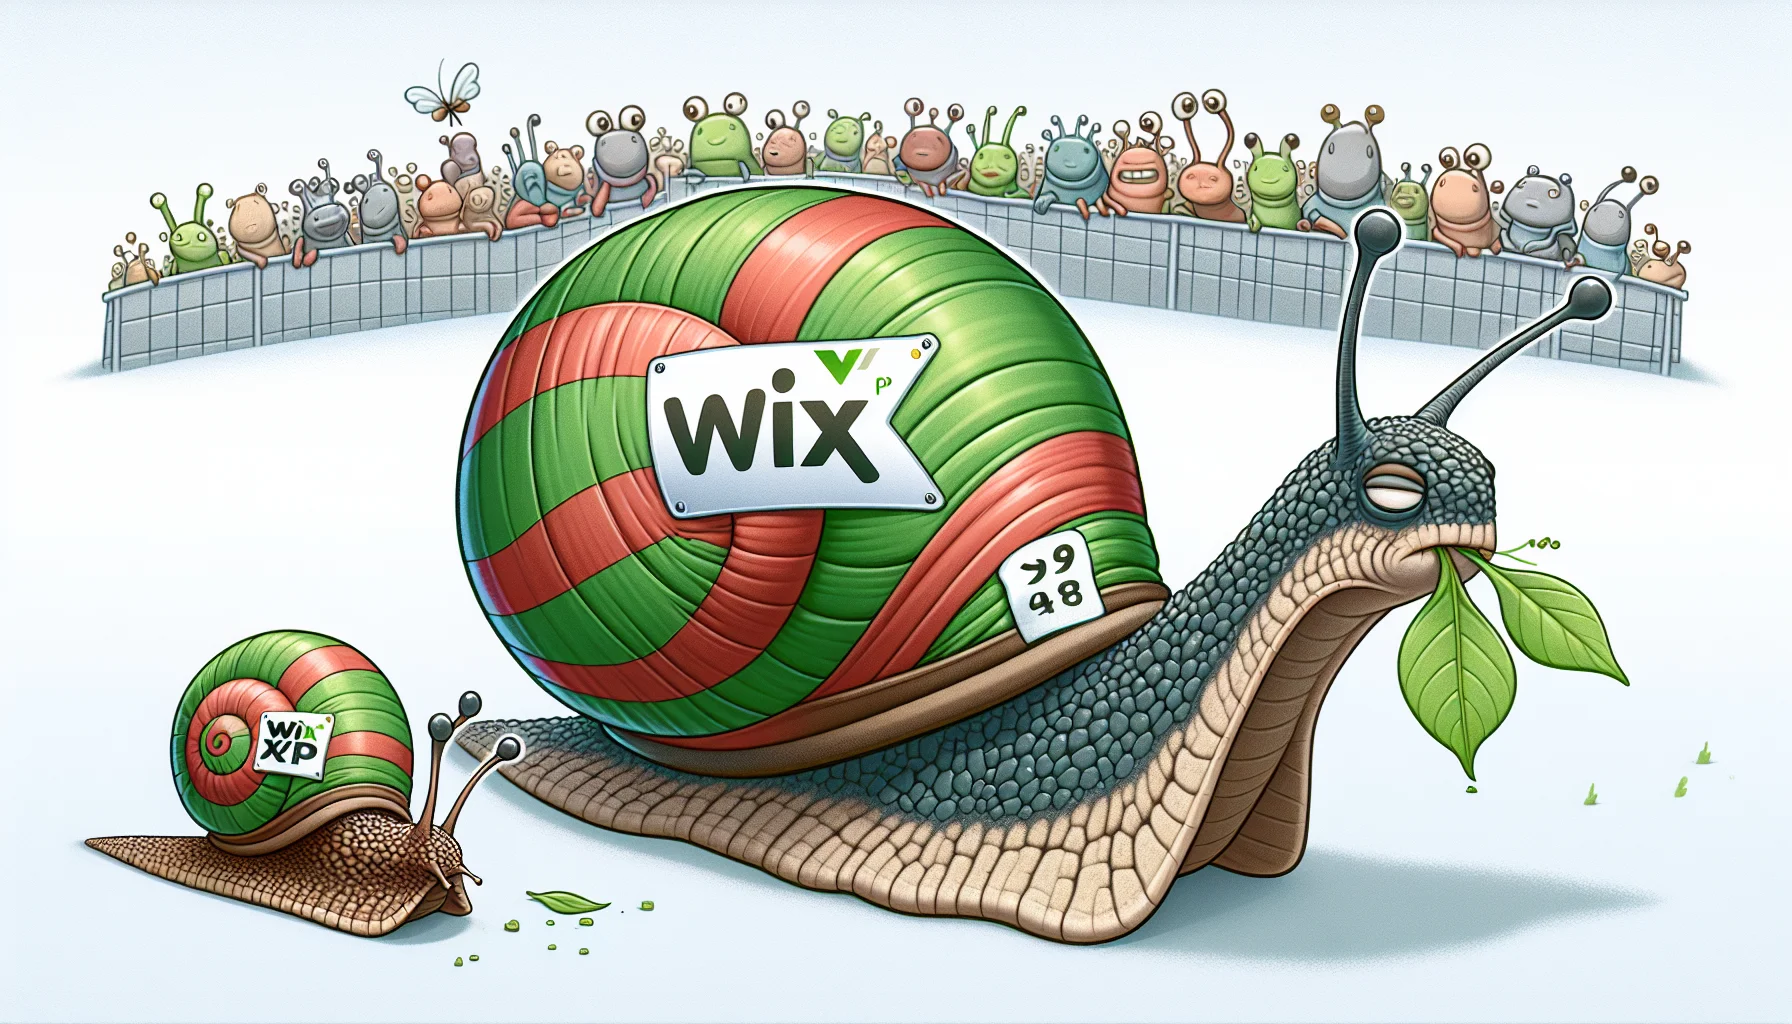 Create a humorous image illustrating a race between two snails. One snail is decked out in racing gear with a 'WIX XP' emblem on its shell. Its face is filled with determination as it slowly glides along. The other snail has a 'WIX' emblem on its shell and appears to be distracted, looking off to the side while munching on a leaf. In the background, a cheering crowd of other insects and small creatures adds to the absurd spectacle. This is a light-hearted allegory illustrating the comparison between 'WIX XP' and 'WIX' in the context of web hosting.